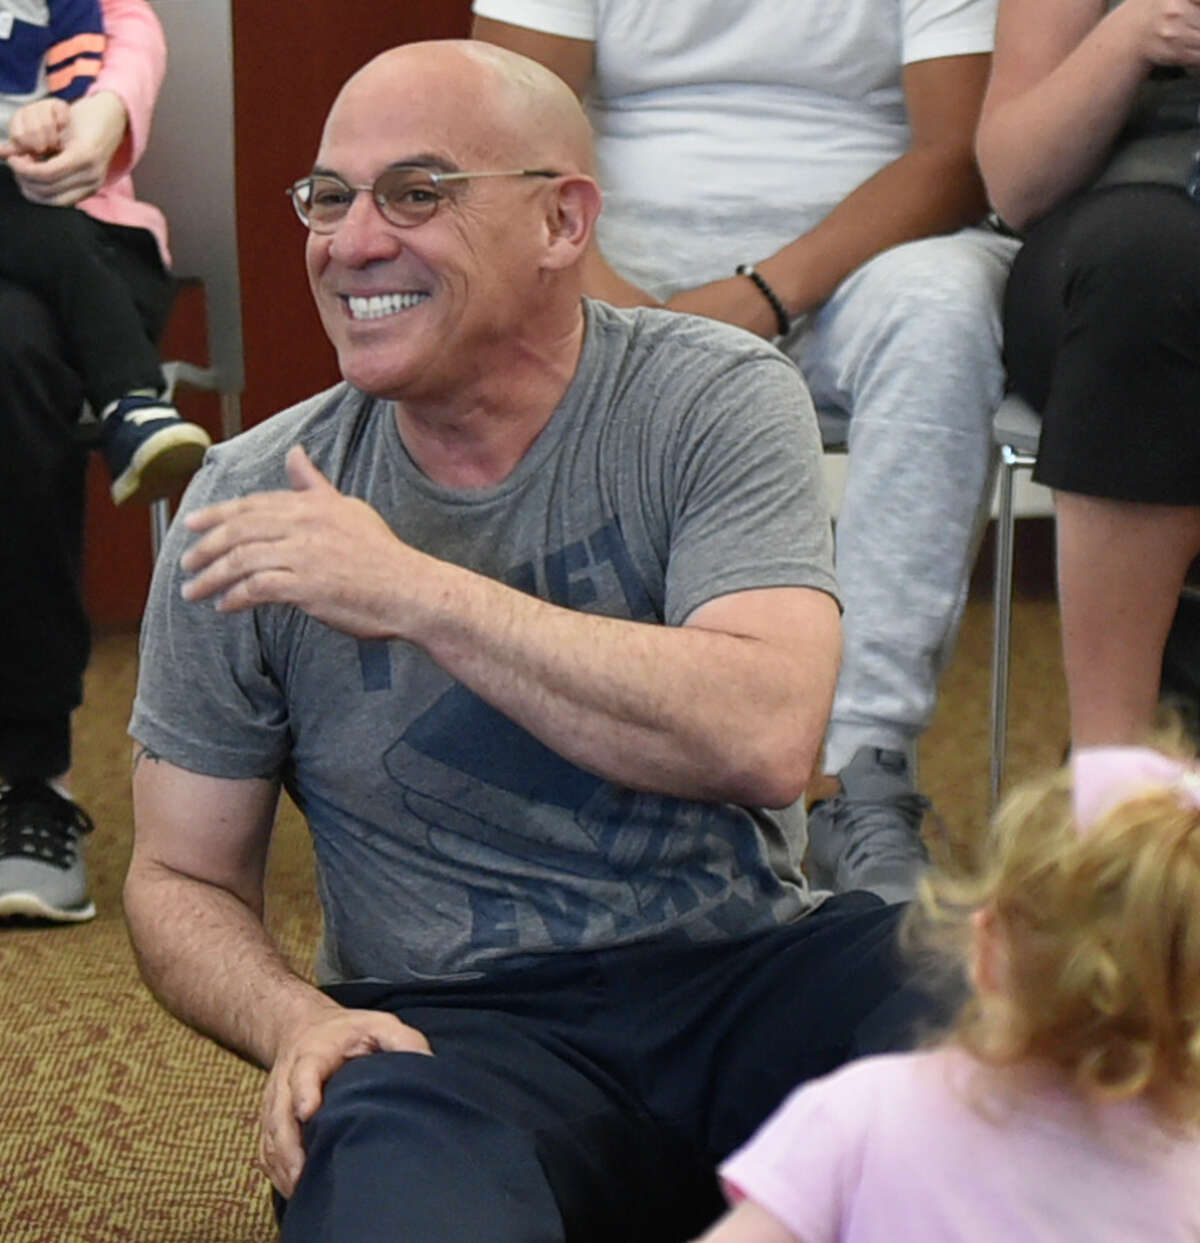 North Haven, Connecticut - Wednesday, May 8, 2019: Librarian Joe "Coach Joe" DeFrancesco leads the "Kids Rock" program Wednesday morning for children 6-months to 5 and their parents engaging them in music, movement, songs, and children's book stories at the North Haven Memorial Library.